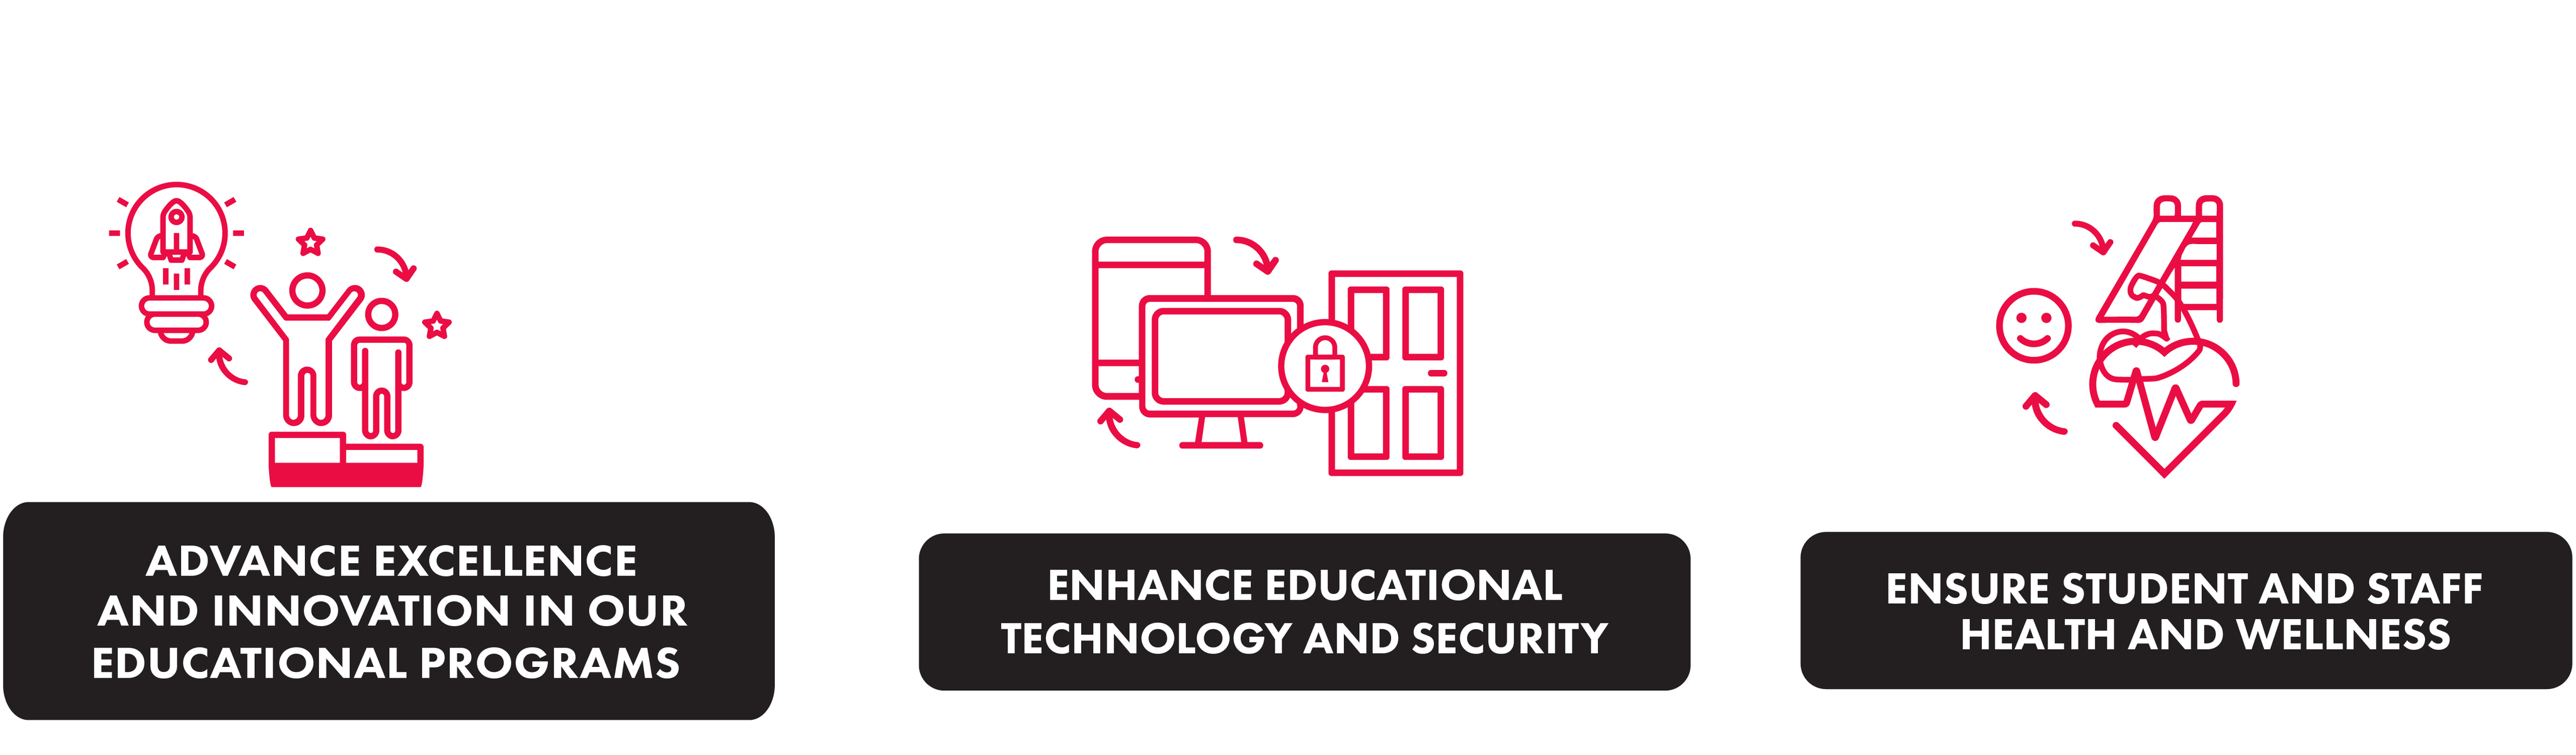 ADVANCE EXCELLENCE AND INNOVATION IN OUR EDUCATIONAL PROGRAMS; ENHANCE EDUCATIONAL TECHNOLOGY AND SECURITY; ENSURE STUDENT AND STAFF HEALTH AND WELLNESS0